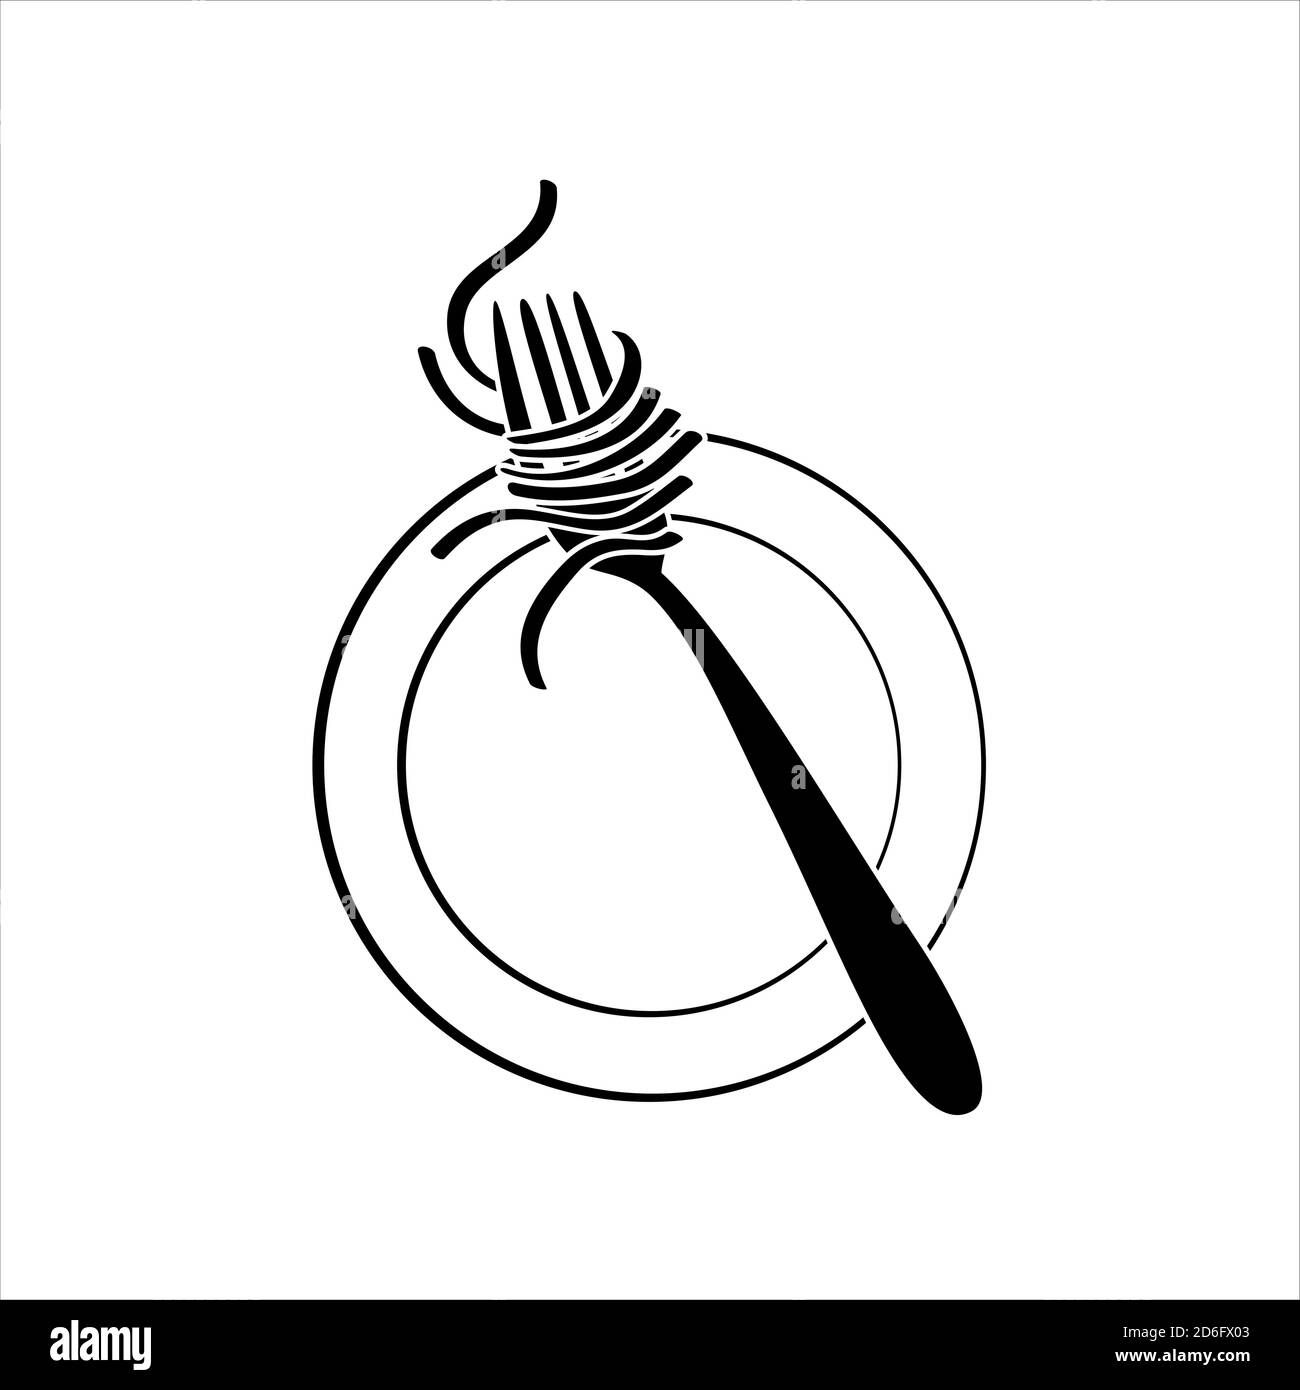 Spoon and Fork logo vector illustration for cafe or restaurant and cooking business Stock Vector